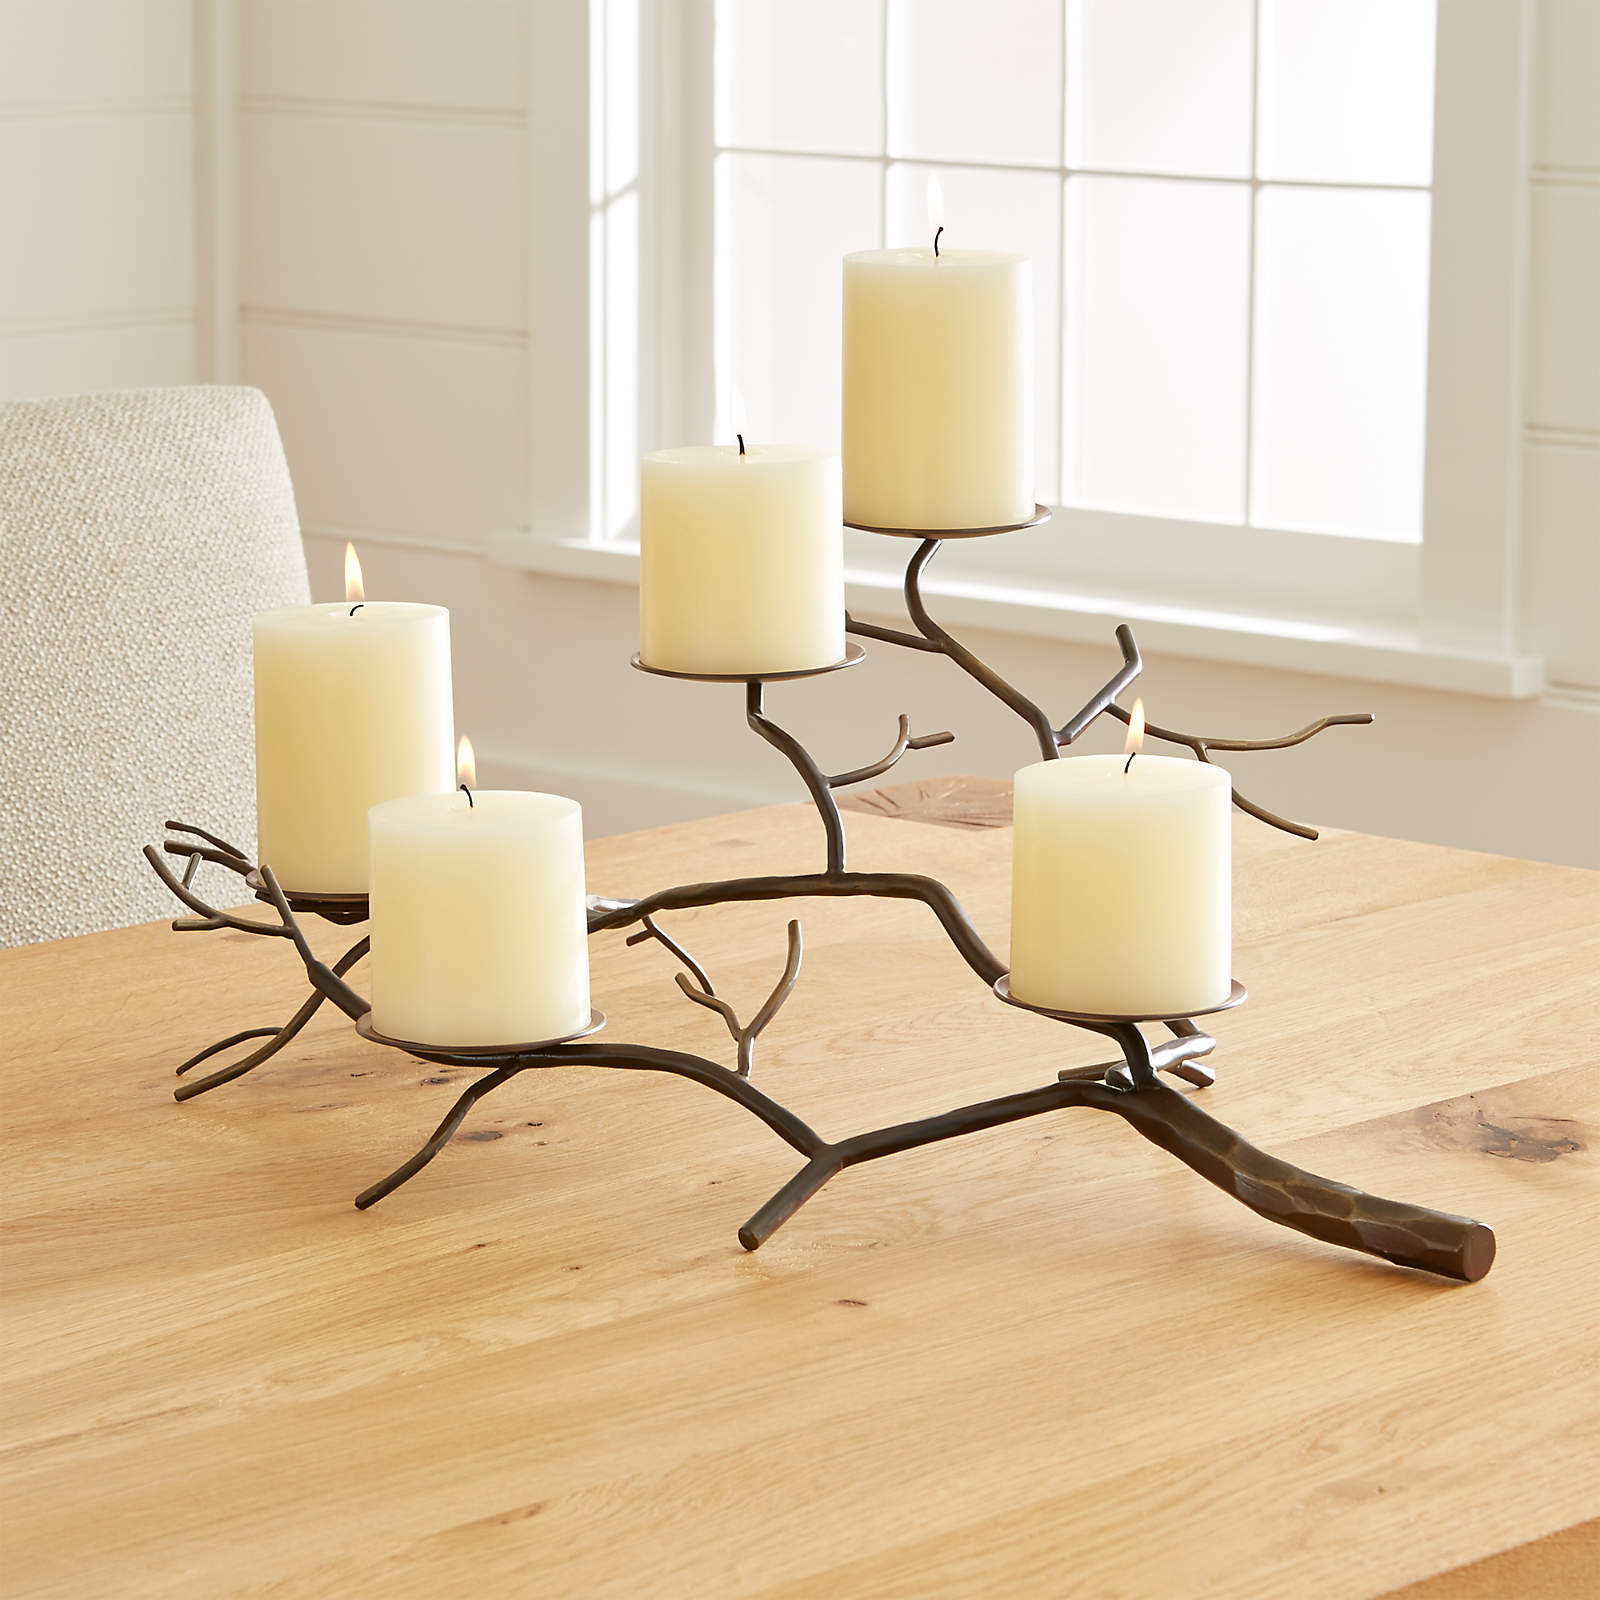 tabletop tree branch candle holder